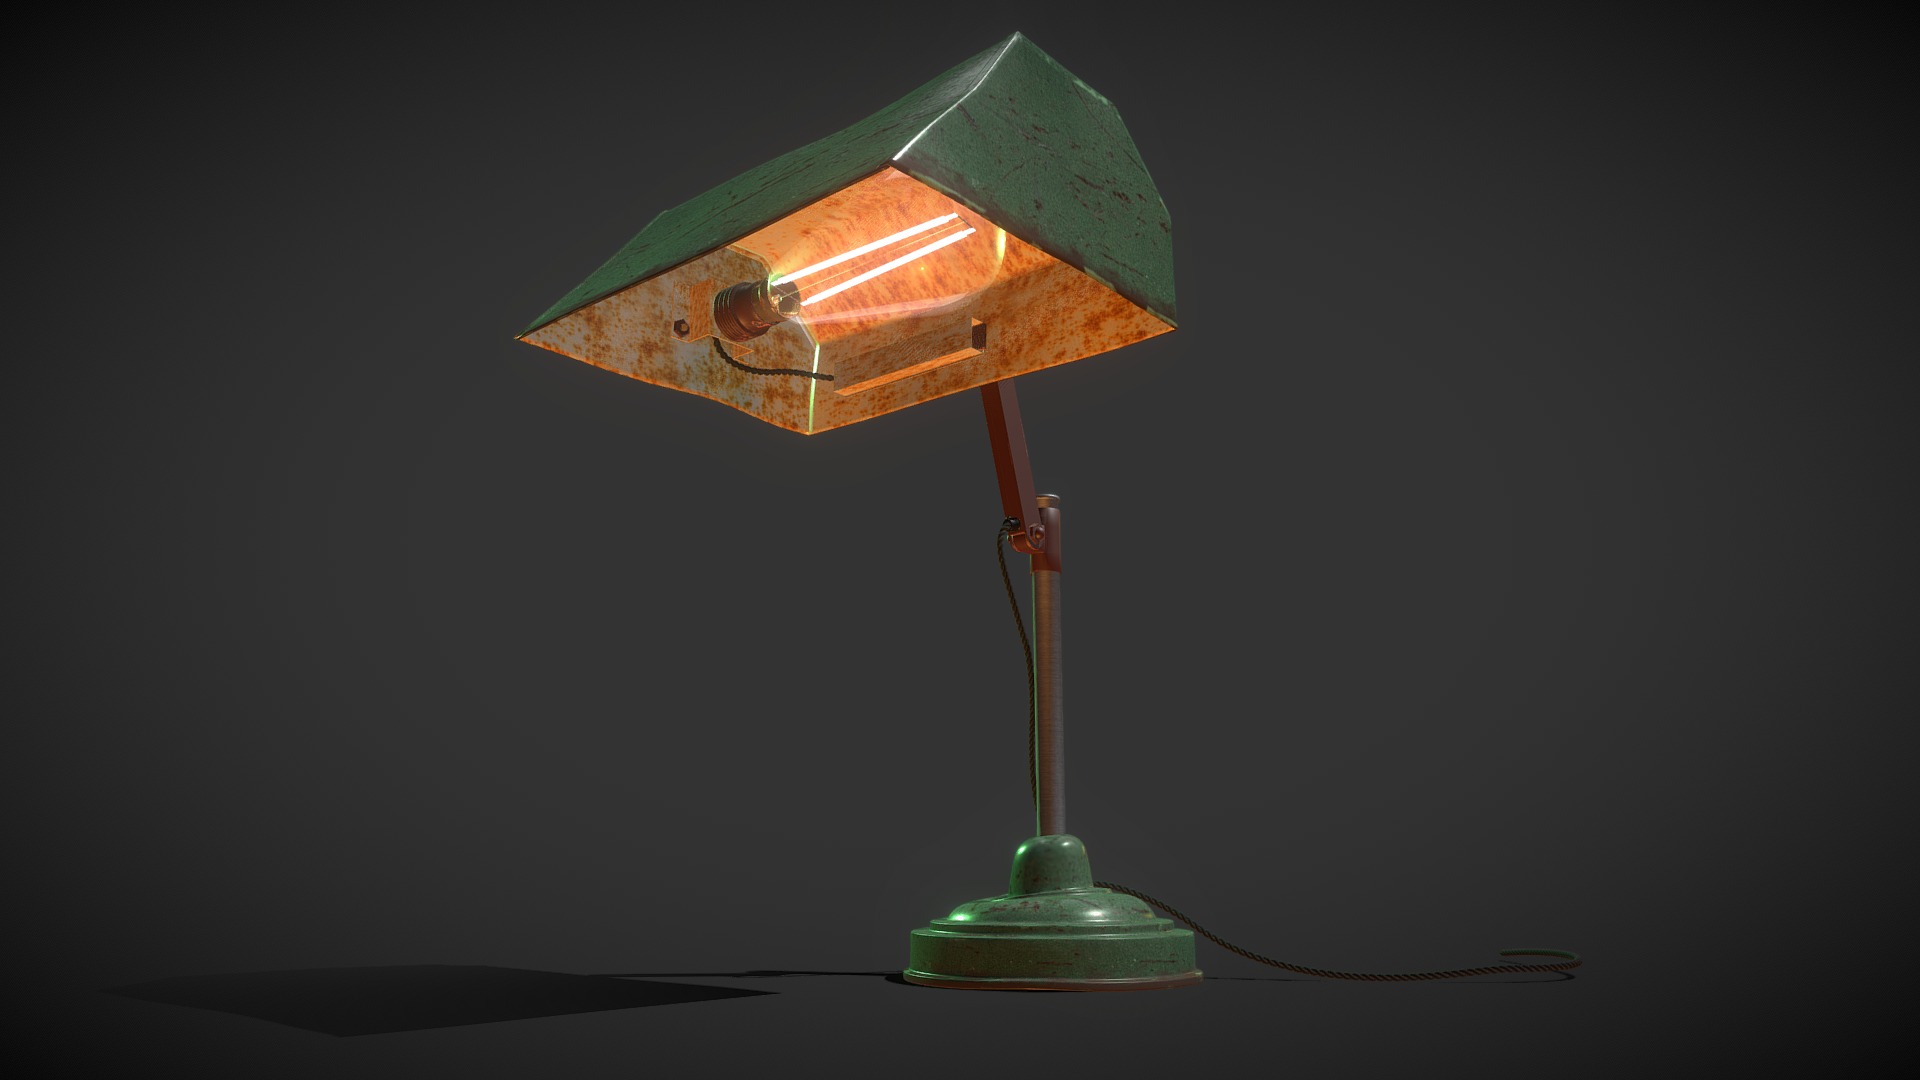 3D model Vintage American Desk Lamp - This is a 3D model of the Vintage American Desk Lamp. The 3D model is about a green and brown birdhouse.